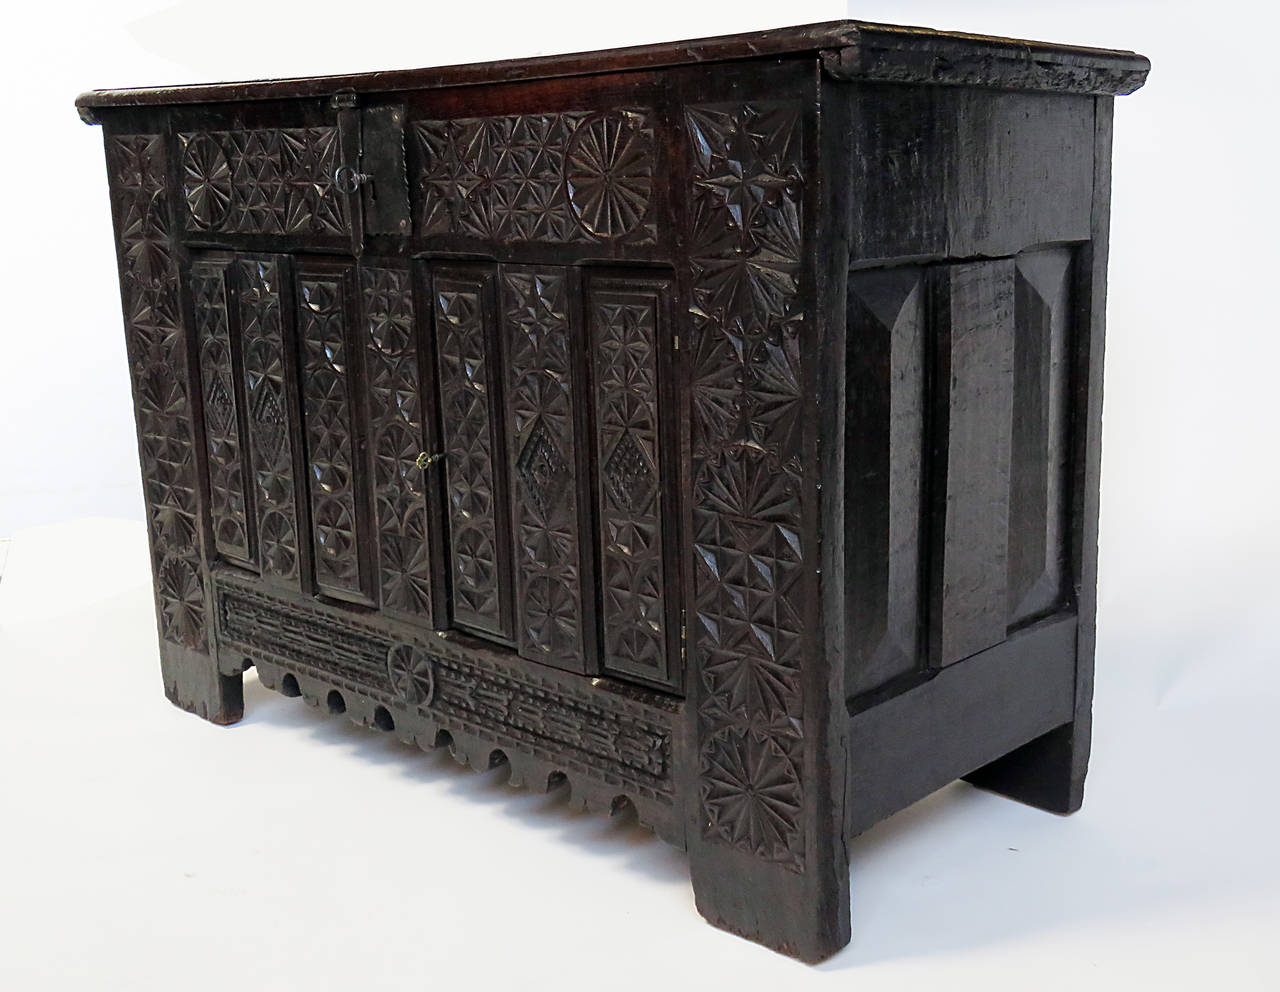 Metal Spanish Basque Baroque Dowry Chest or Coffer, circa 1680